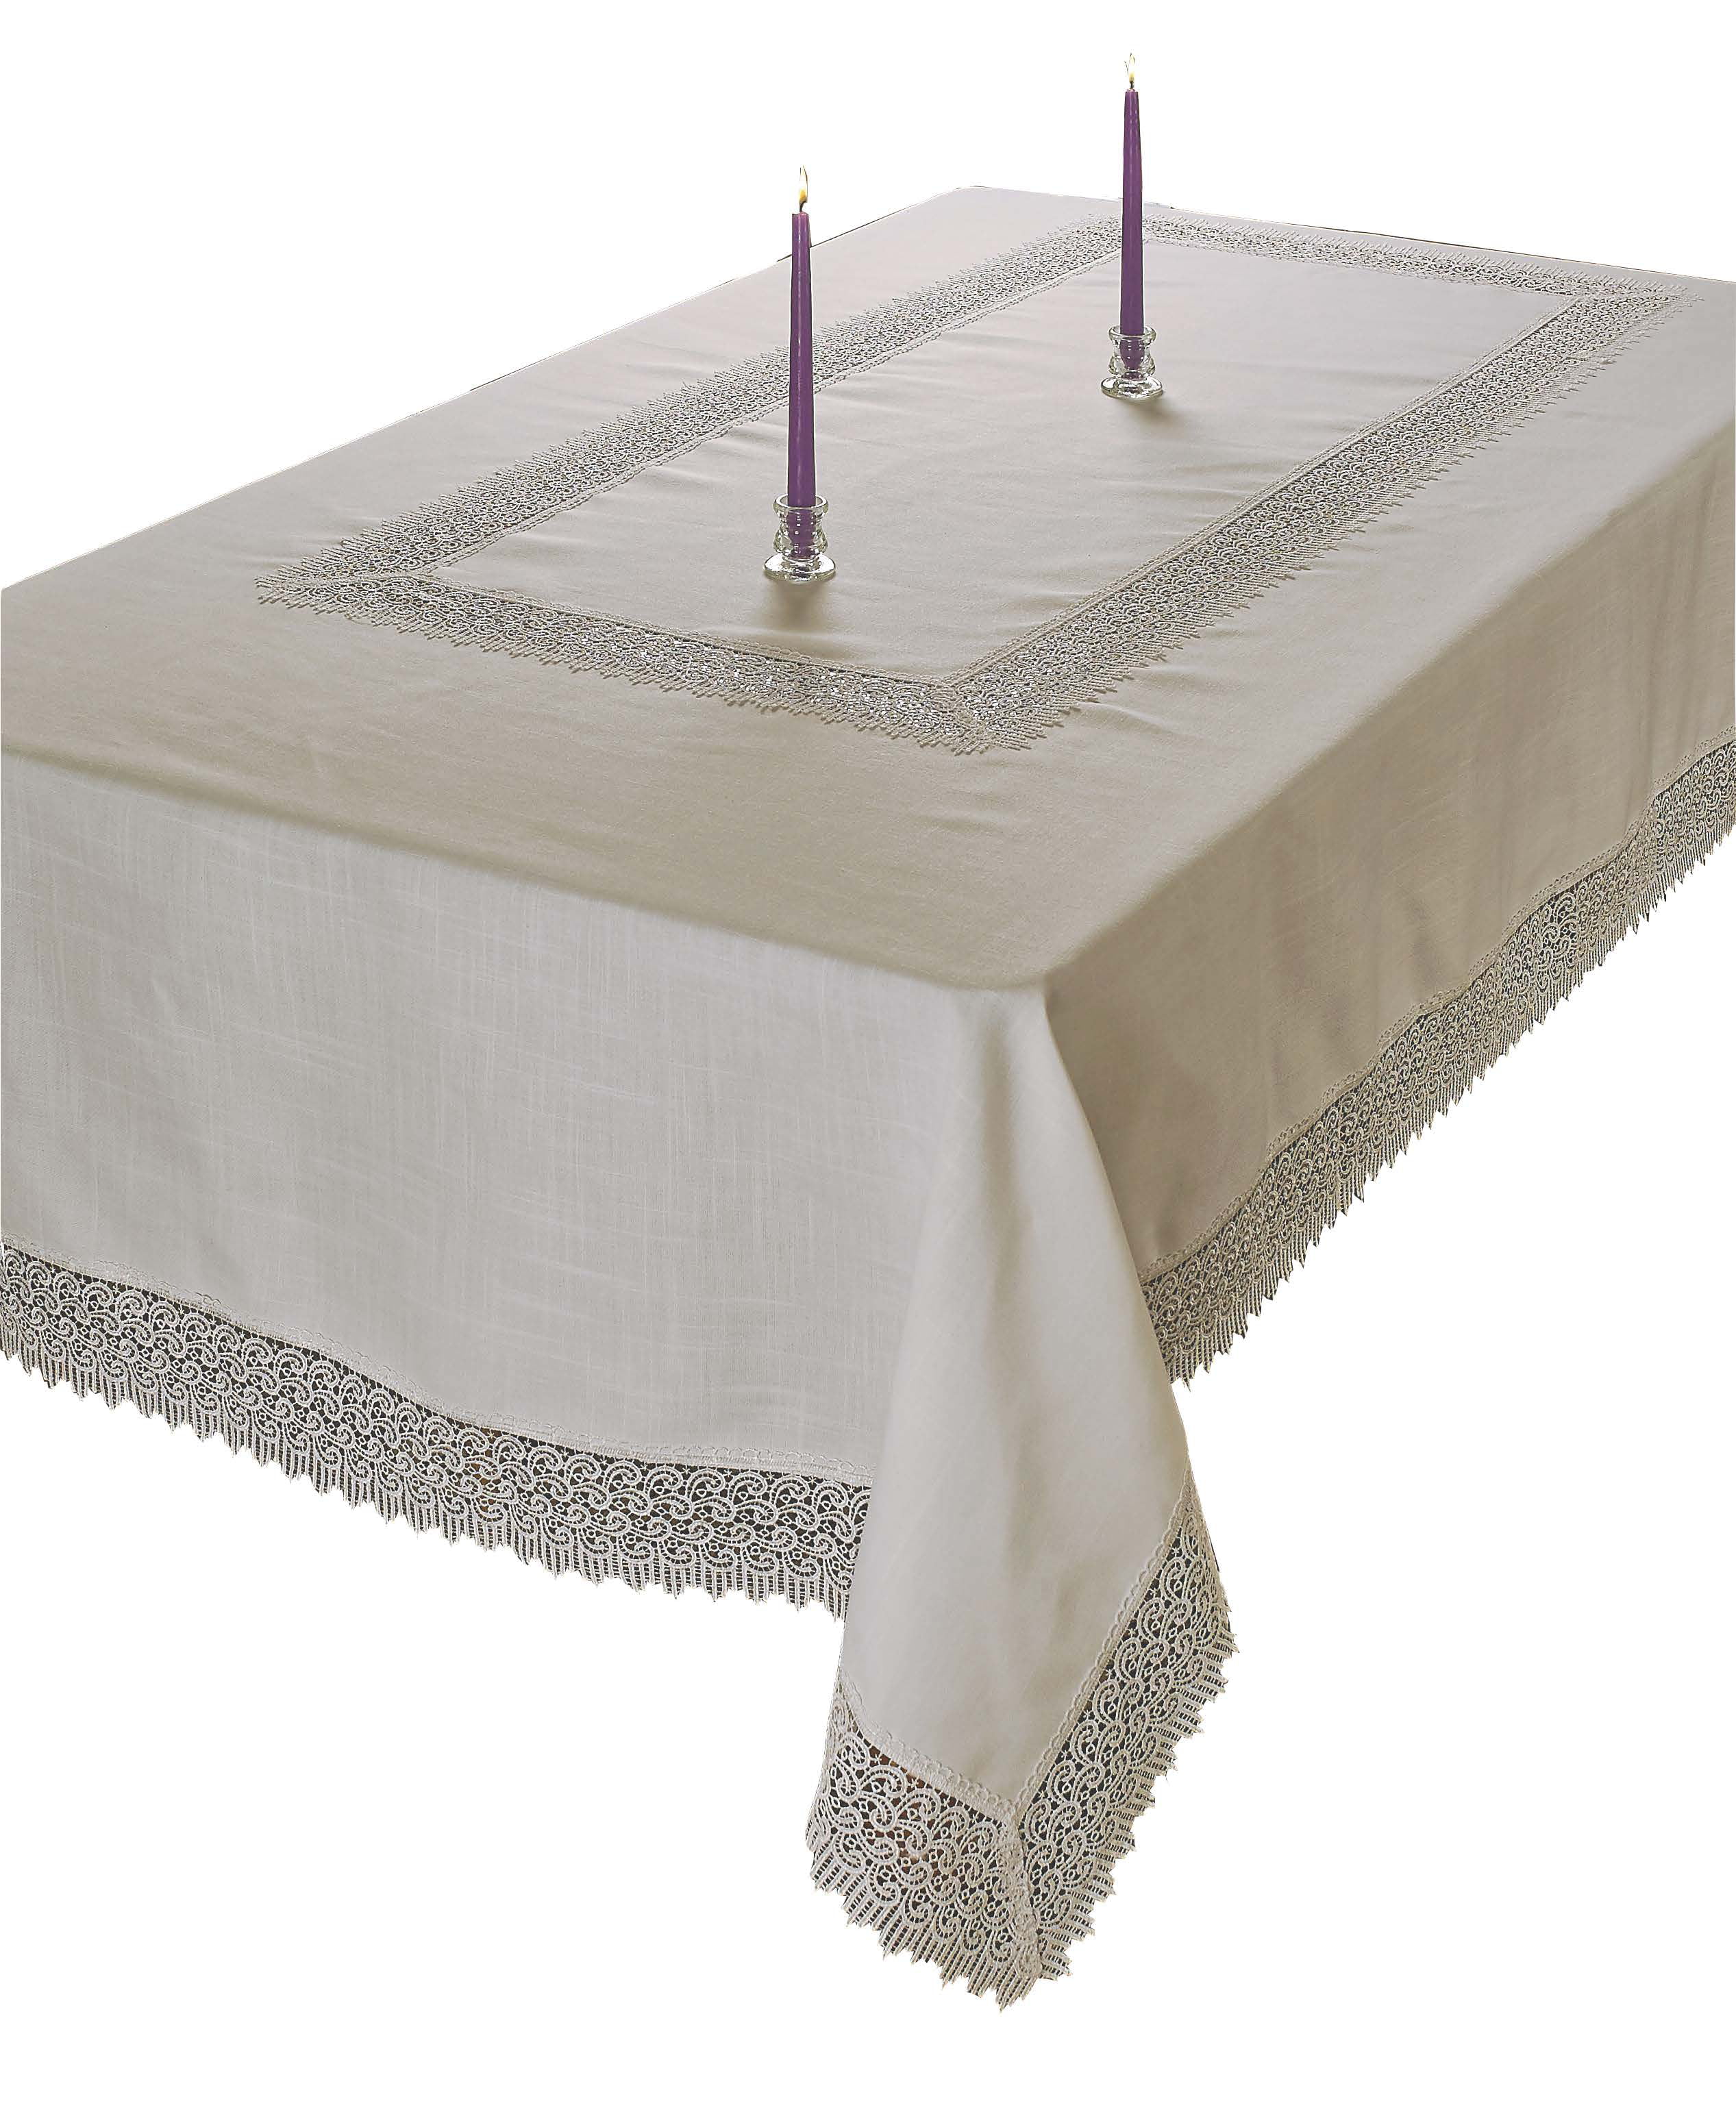 60'' X 144'' LACE BANQUET TABLECLOTH IVORY IN COLOR    HUGE RECTANGLE 